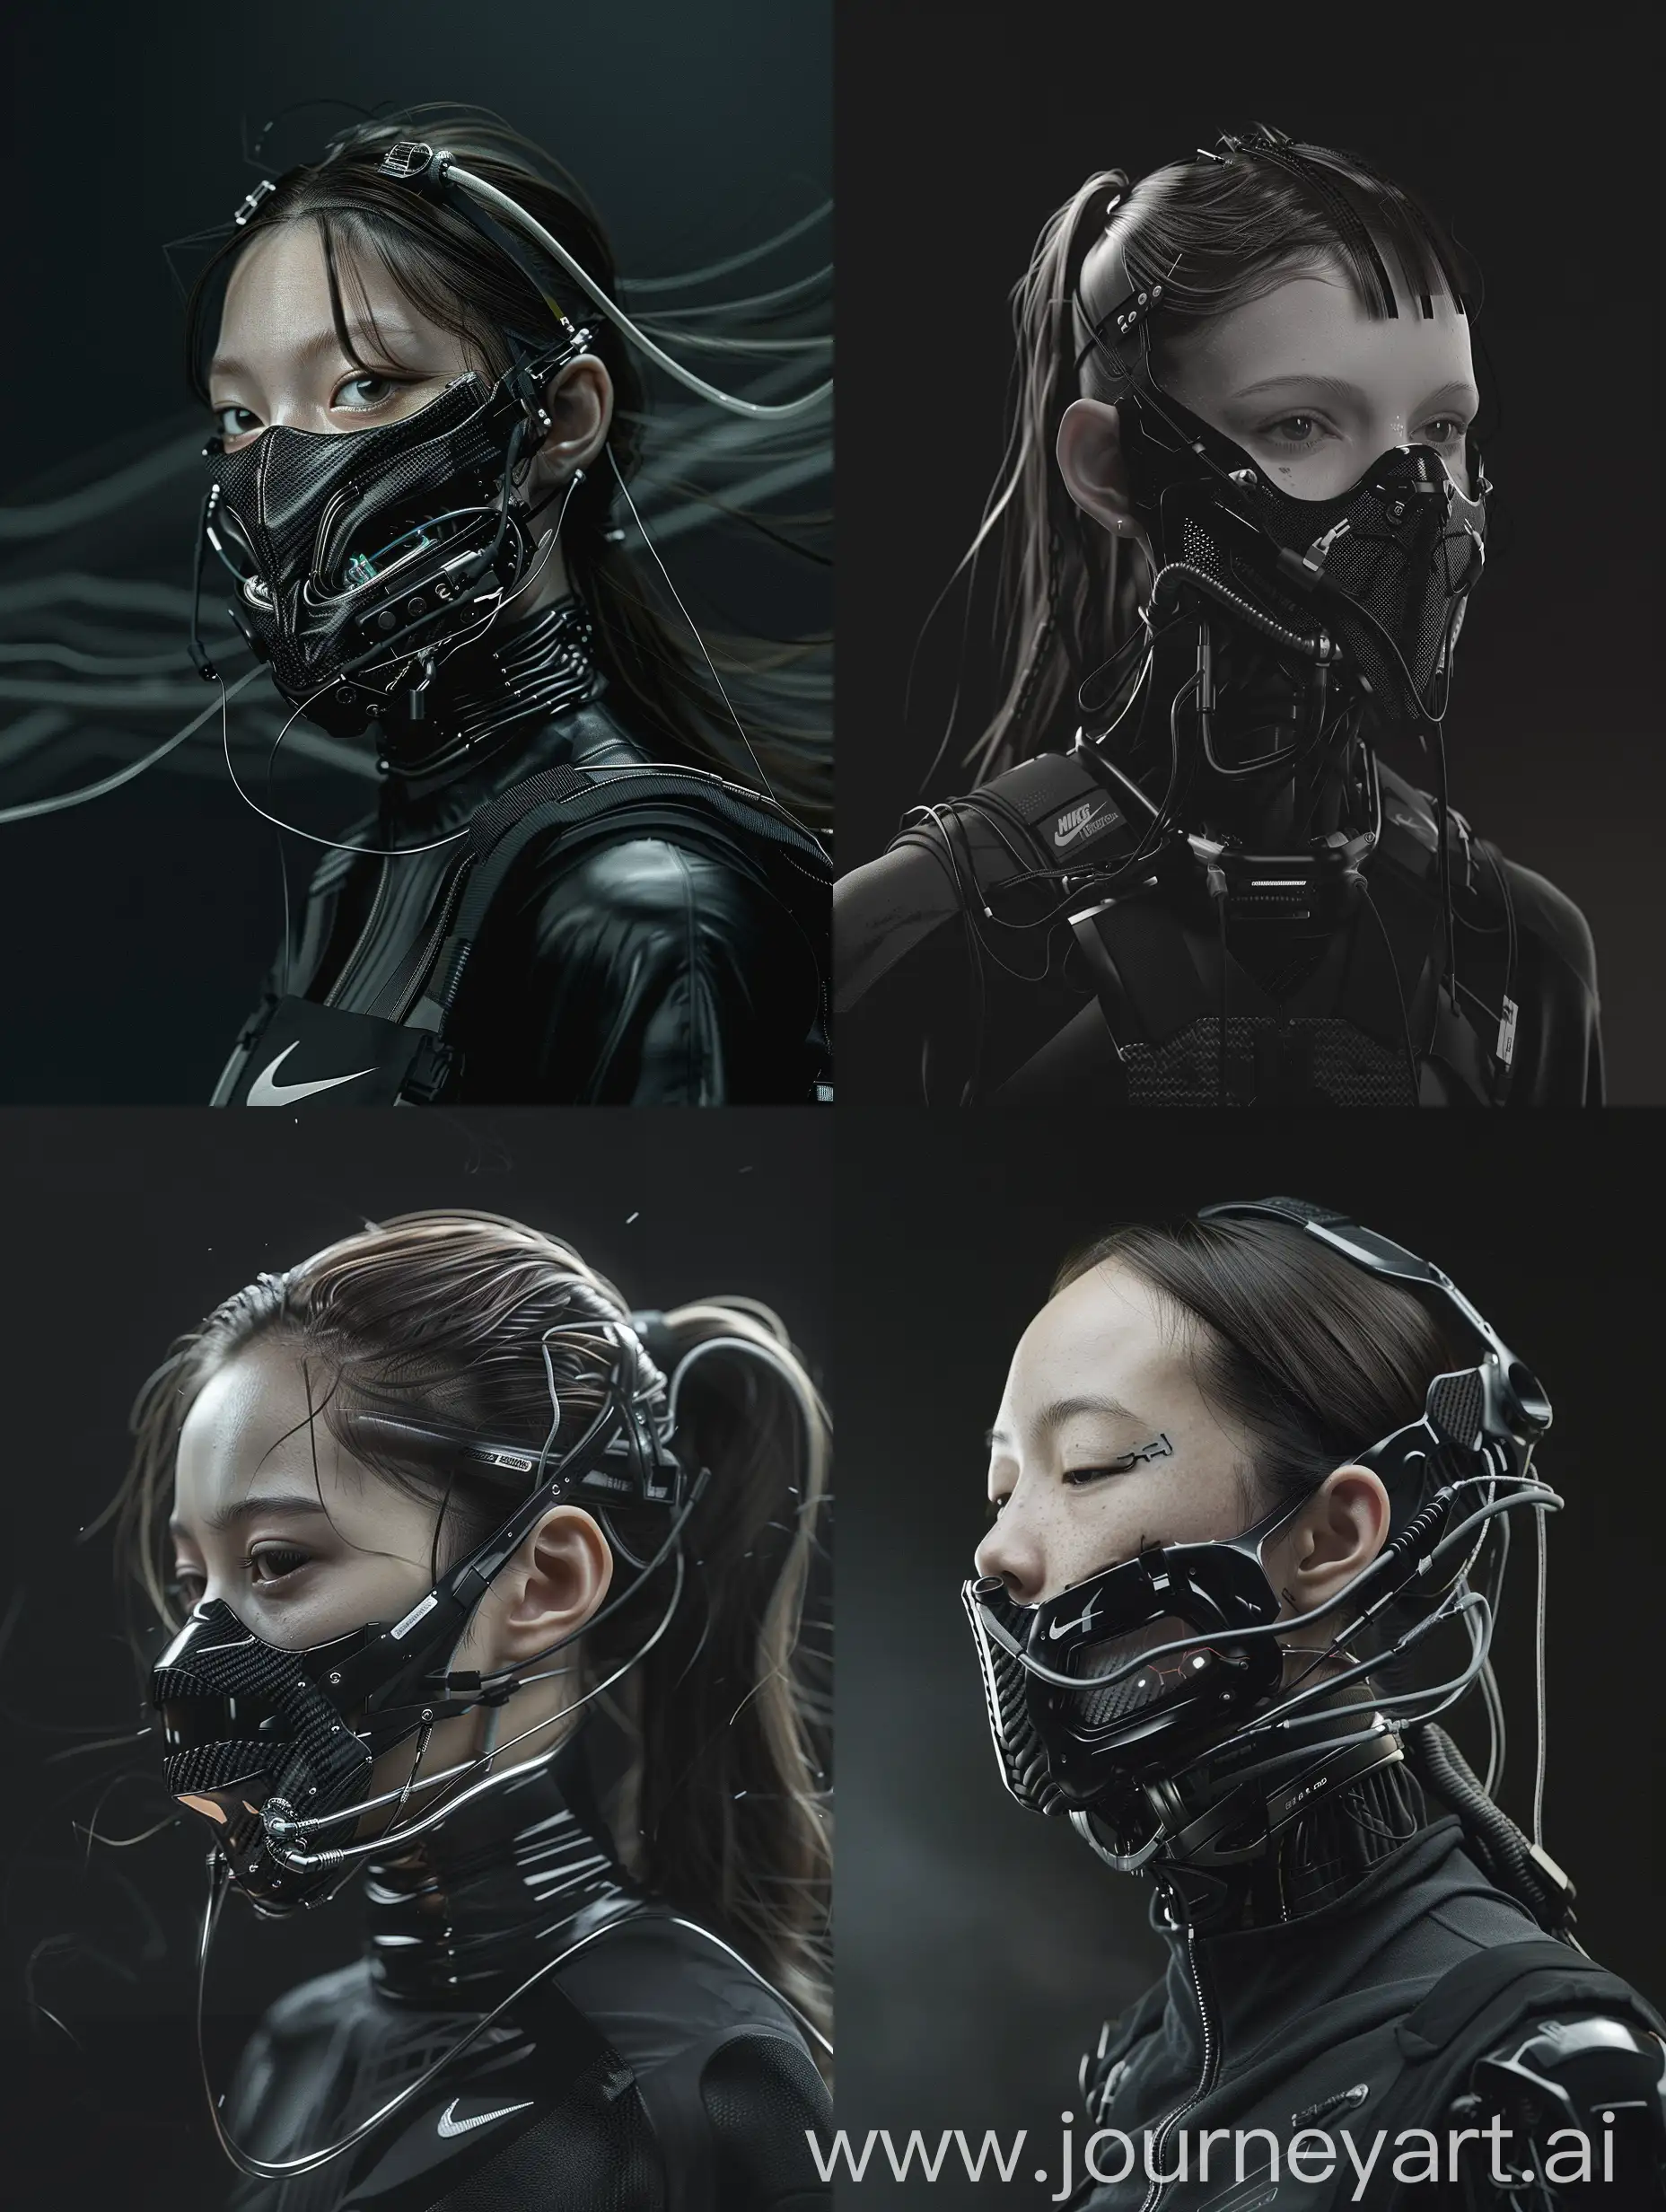 Against a sleek black backdrop, witness the captivating presence of a character adorned with a cybernetic mouth-covering mask. It seamlessly merges cutting-edge technology with intricate details, showcasing carbon fiber textures, sleek aluminum accents, and wires. Symbolizing the delicate equilibrium between humanity and machine, her appearance embodies the essence of a futuristic cyberpunk aesthetic, further accentuated by Nike-inspired add-ons. With dynamic movements reminiscent of action-packed film sequences, accompanied by cinematic haze and an electric energy, she exudes an irresistible allure that commands attention.